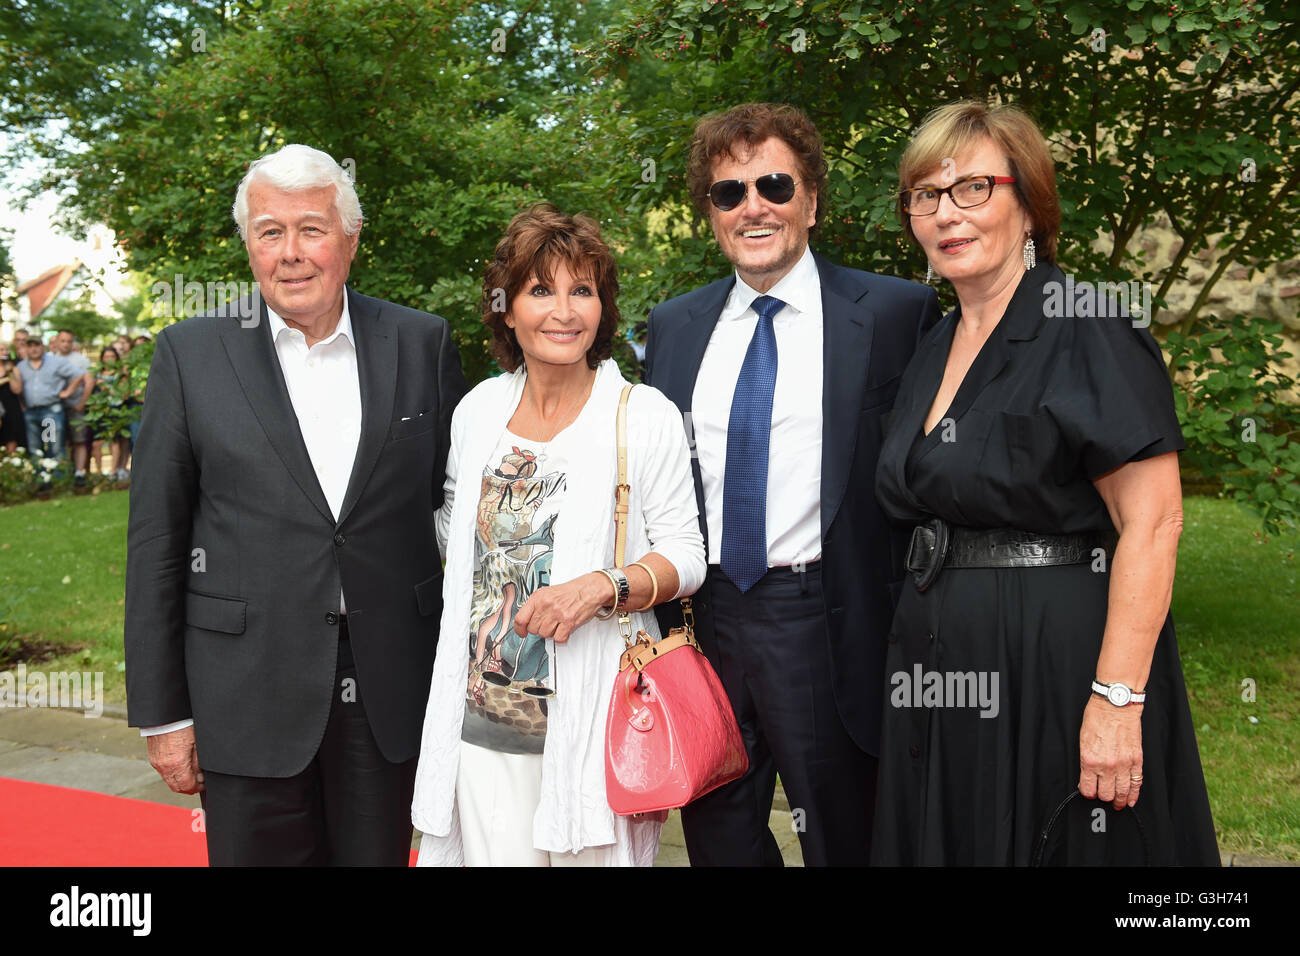 Bad Hersfeld, Germany. 24th June, 2016. Actors Peter Weck (l-r) and Susanne Uhlen and theatre manager Dieter Wedel with his wife Uschi Wolters posing during hte opening of the Bad Hersfeld Festival on the red carpet in Bad Hersfeld, Germany, 24 June 2016. PHOTO: UWE ZUCCHI/dpa/Alamy Live News Stock Photo